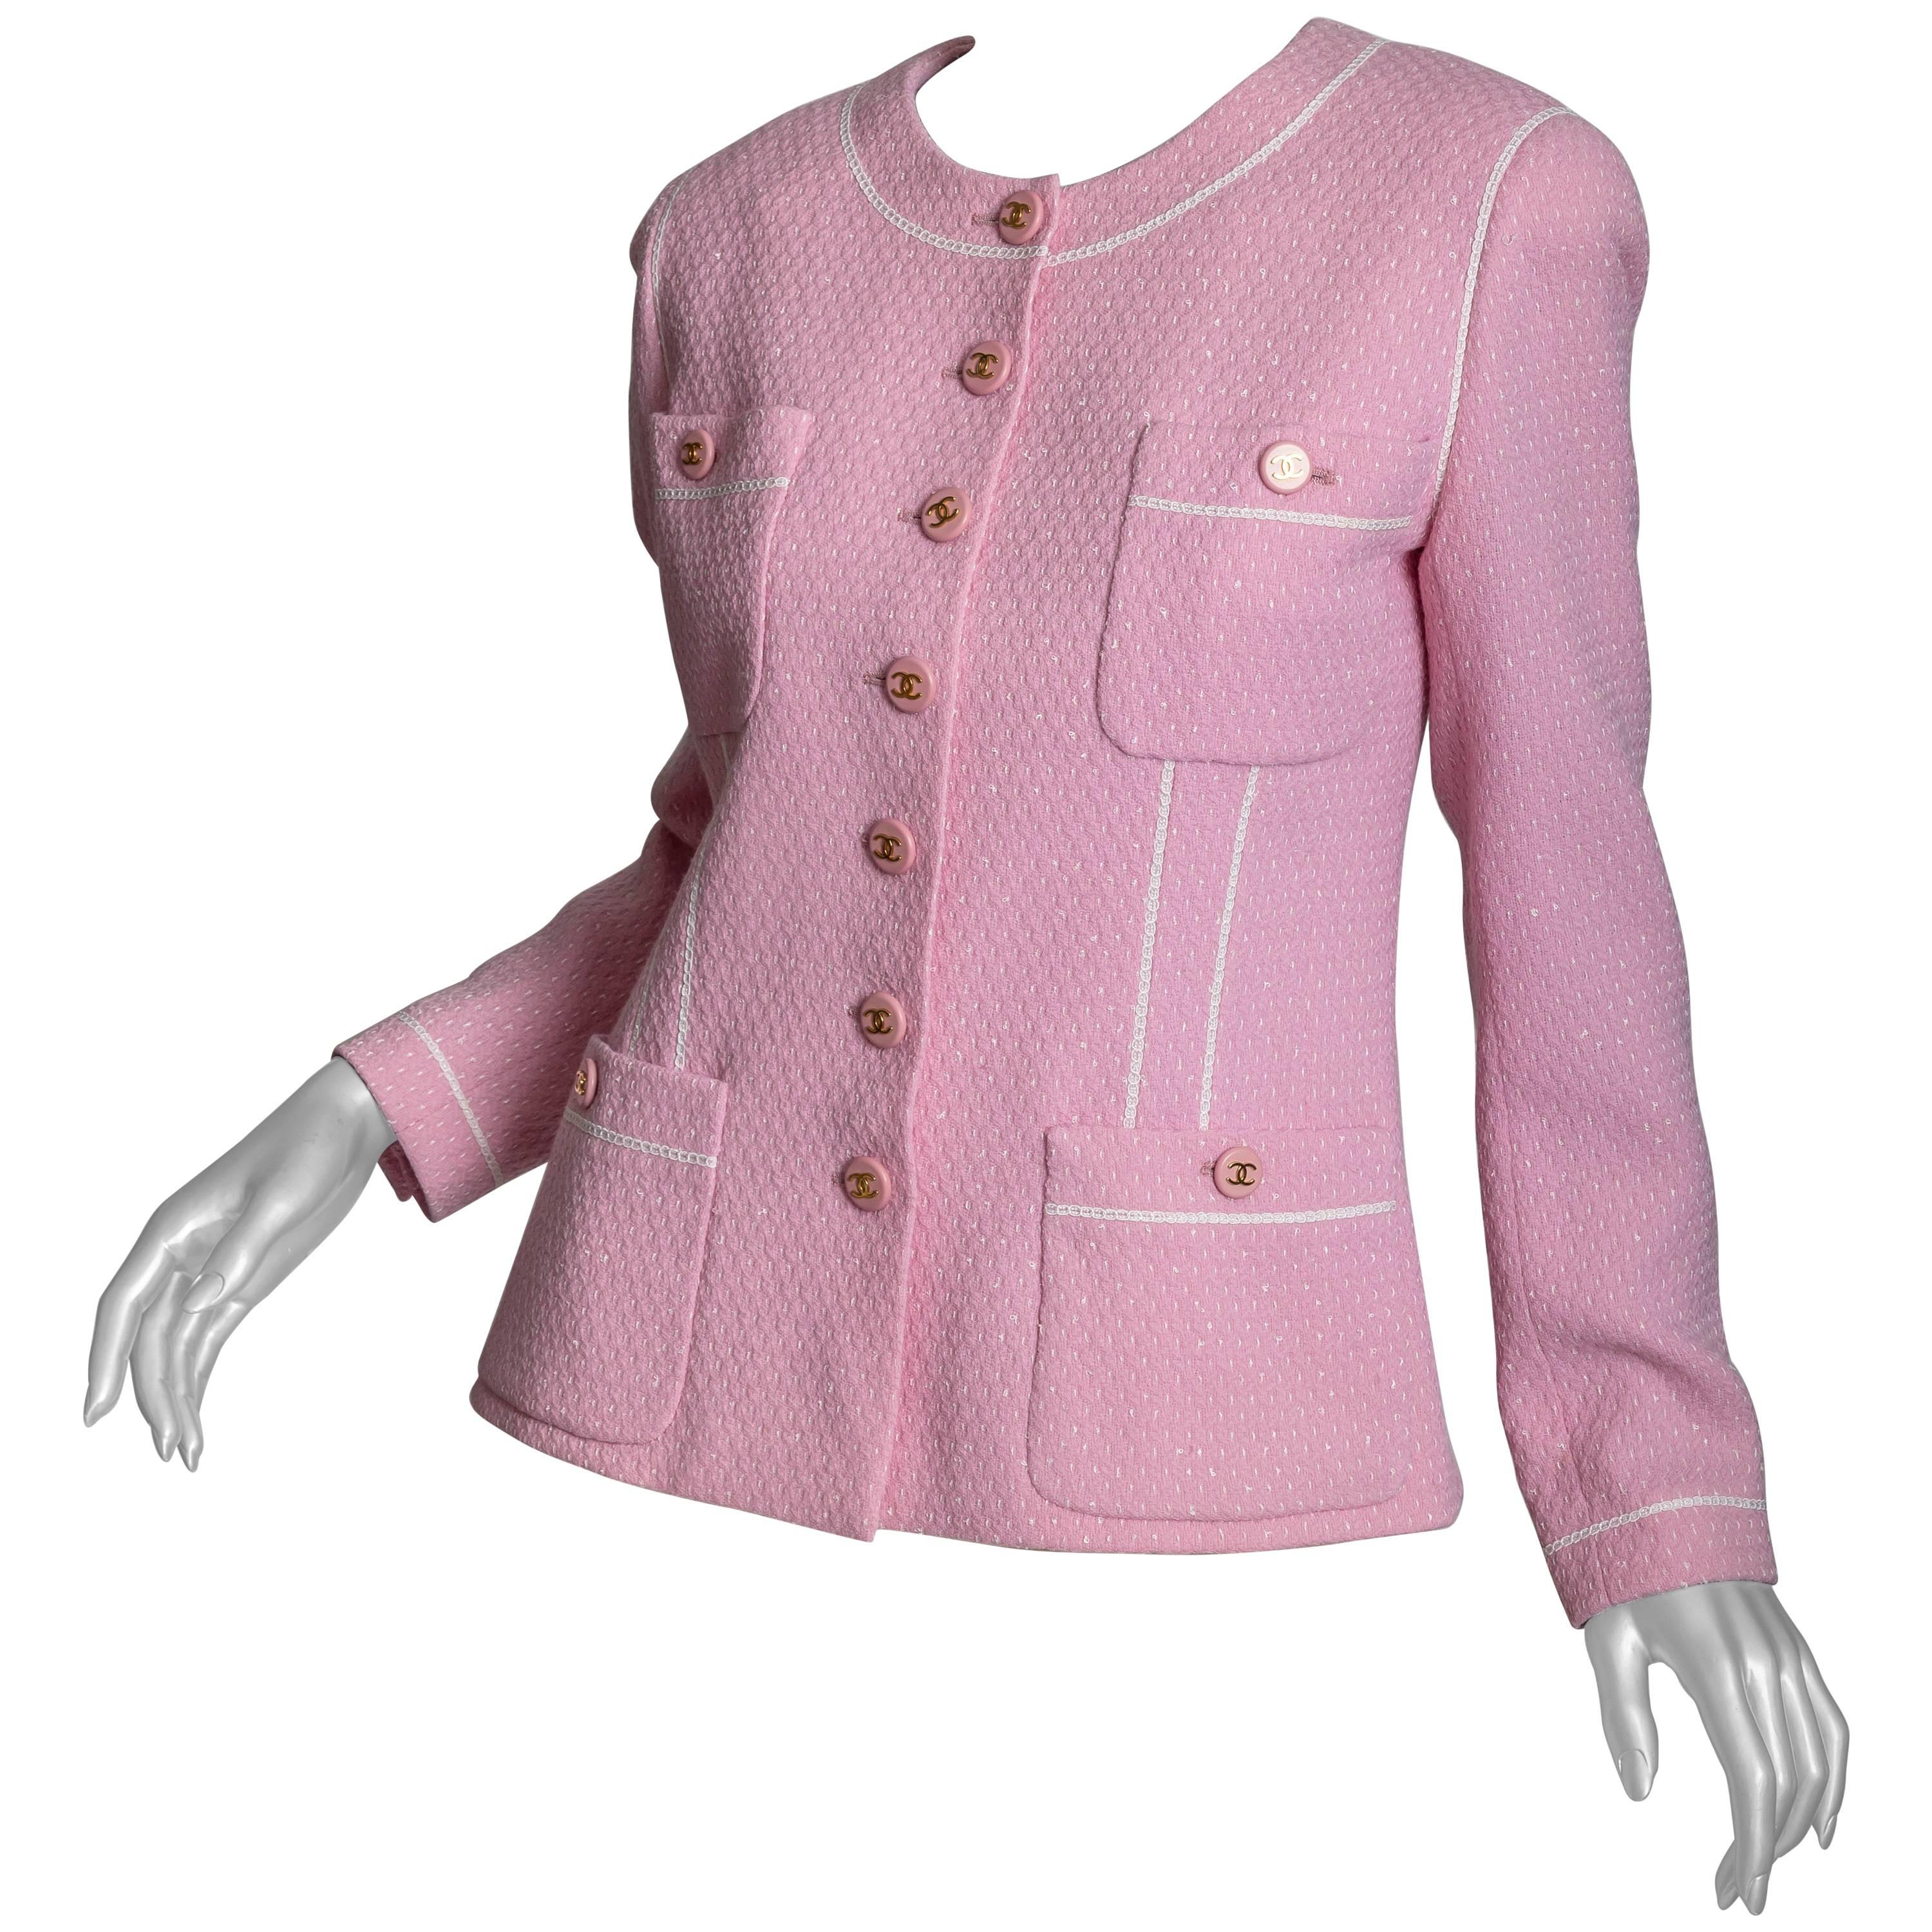 Chanel Jacket in Pink with Chanel Logo Buttons - 42